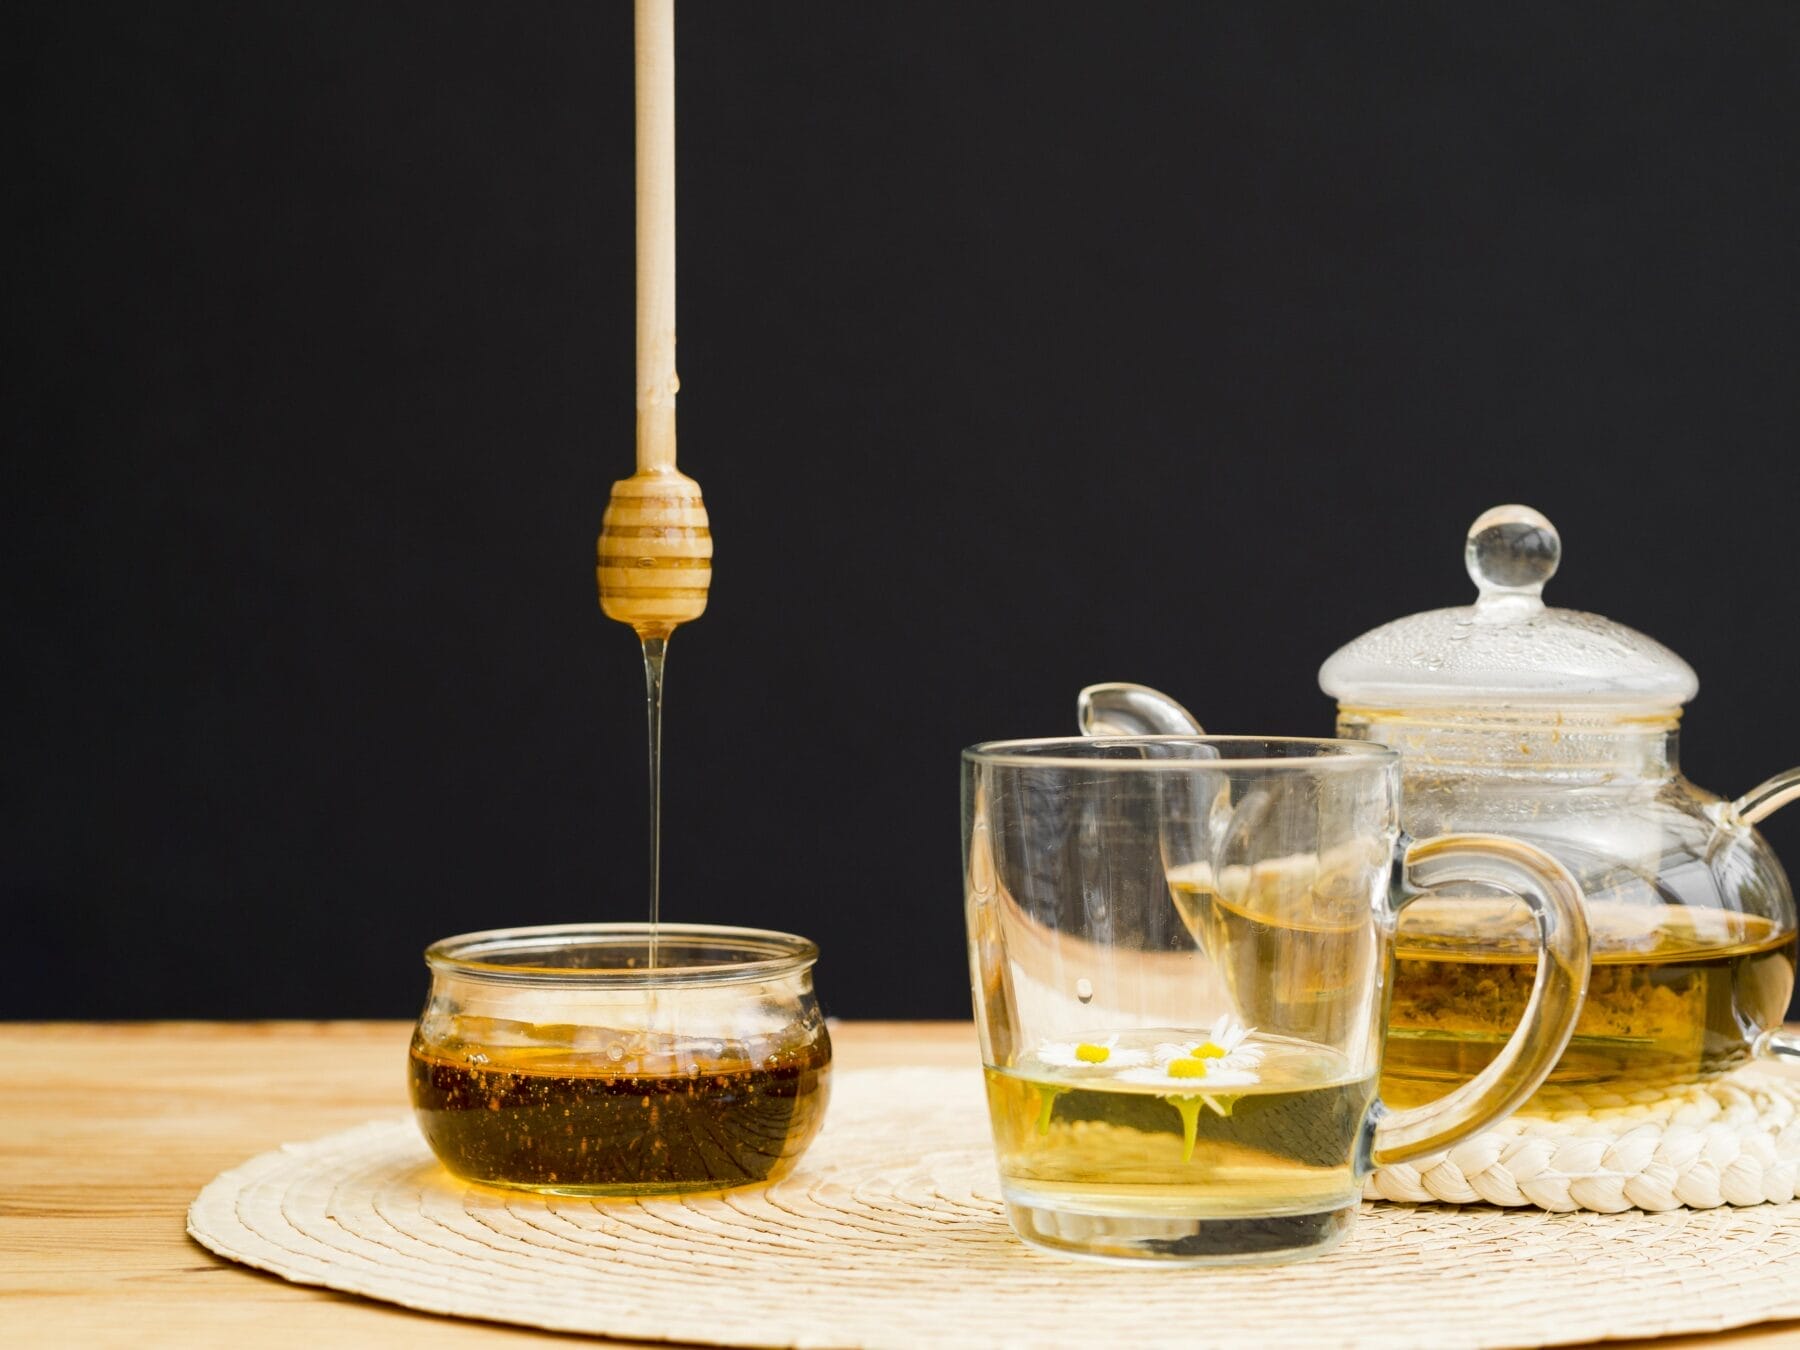 Honey drips from a dipper into a small jar, beside a glass cup of tea with chamomile flowers, and a glass teapot on a woven placemat against a dark background. honeymoon tea